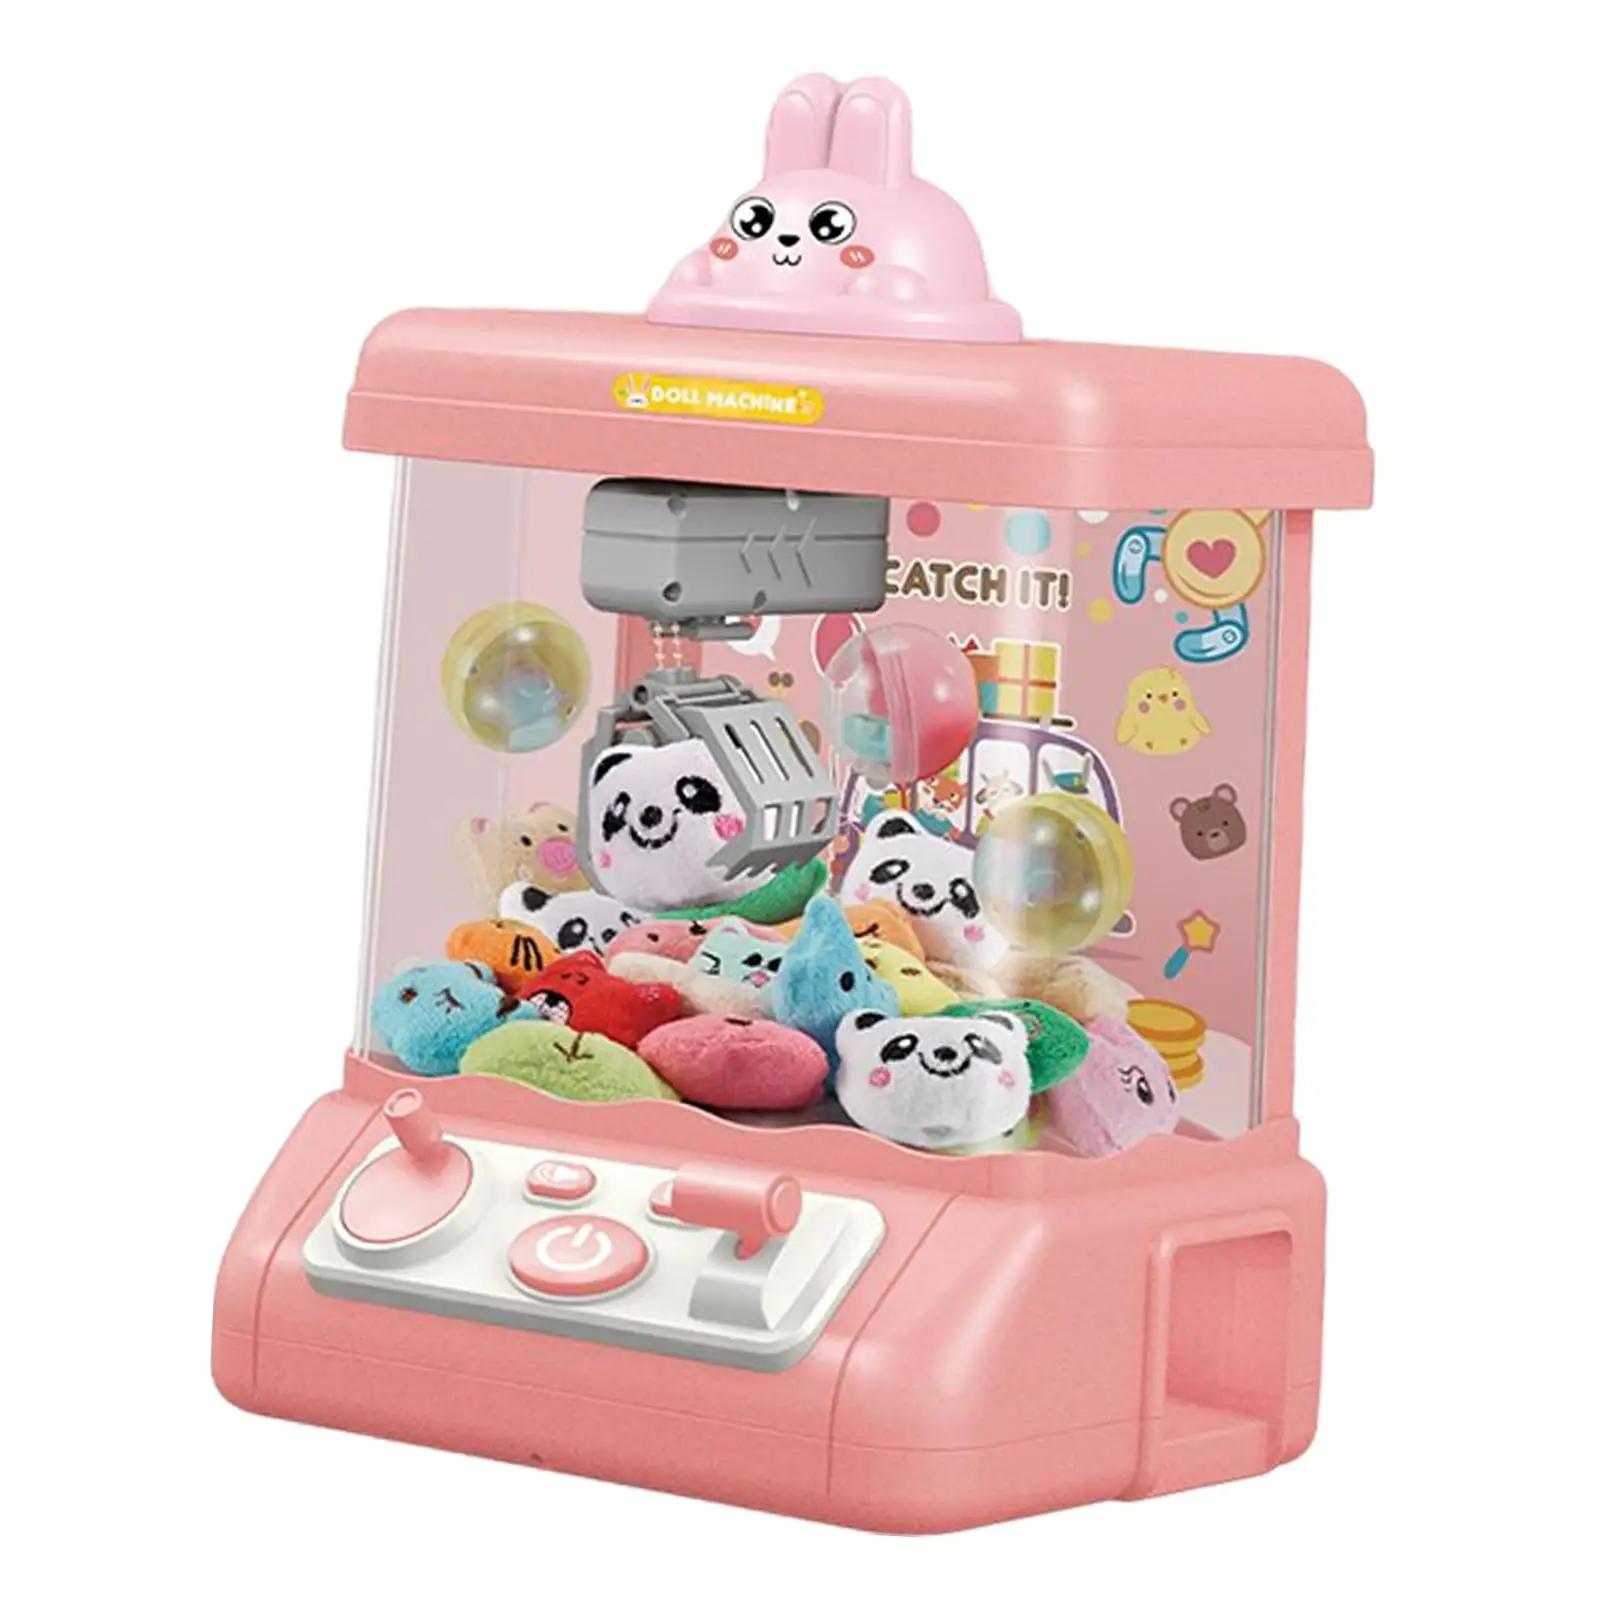 Household Claw Machine Intelligent System Doll Machine DIY Catching Doll Machine Slot Machine Grabber Machine for Birthday Gifts